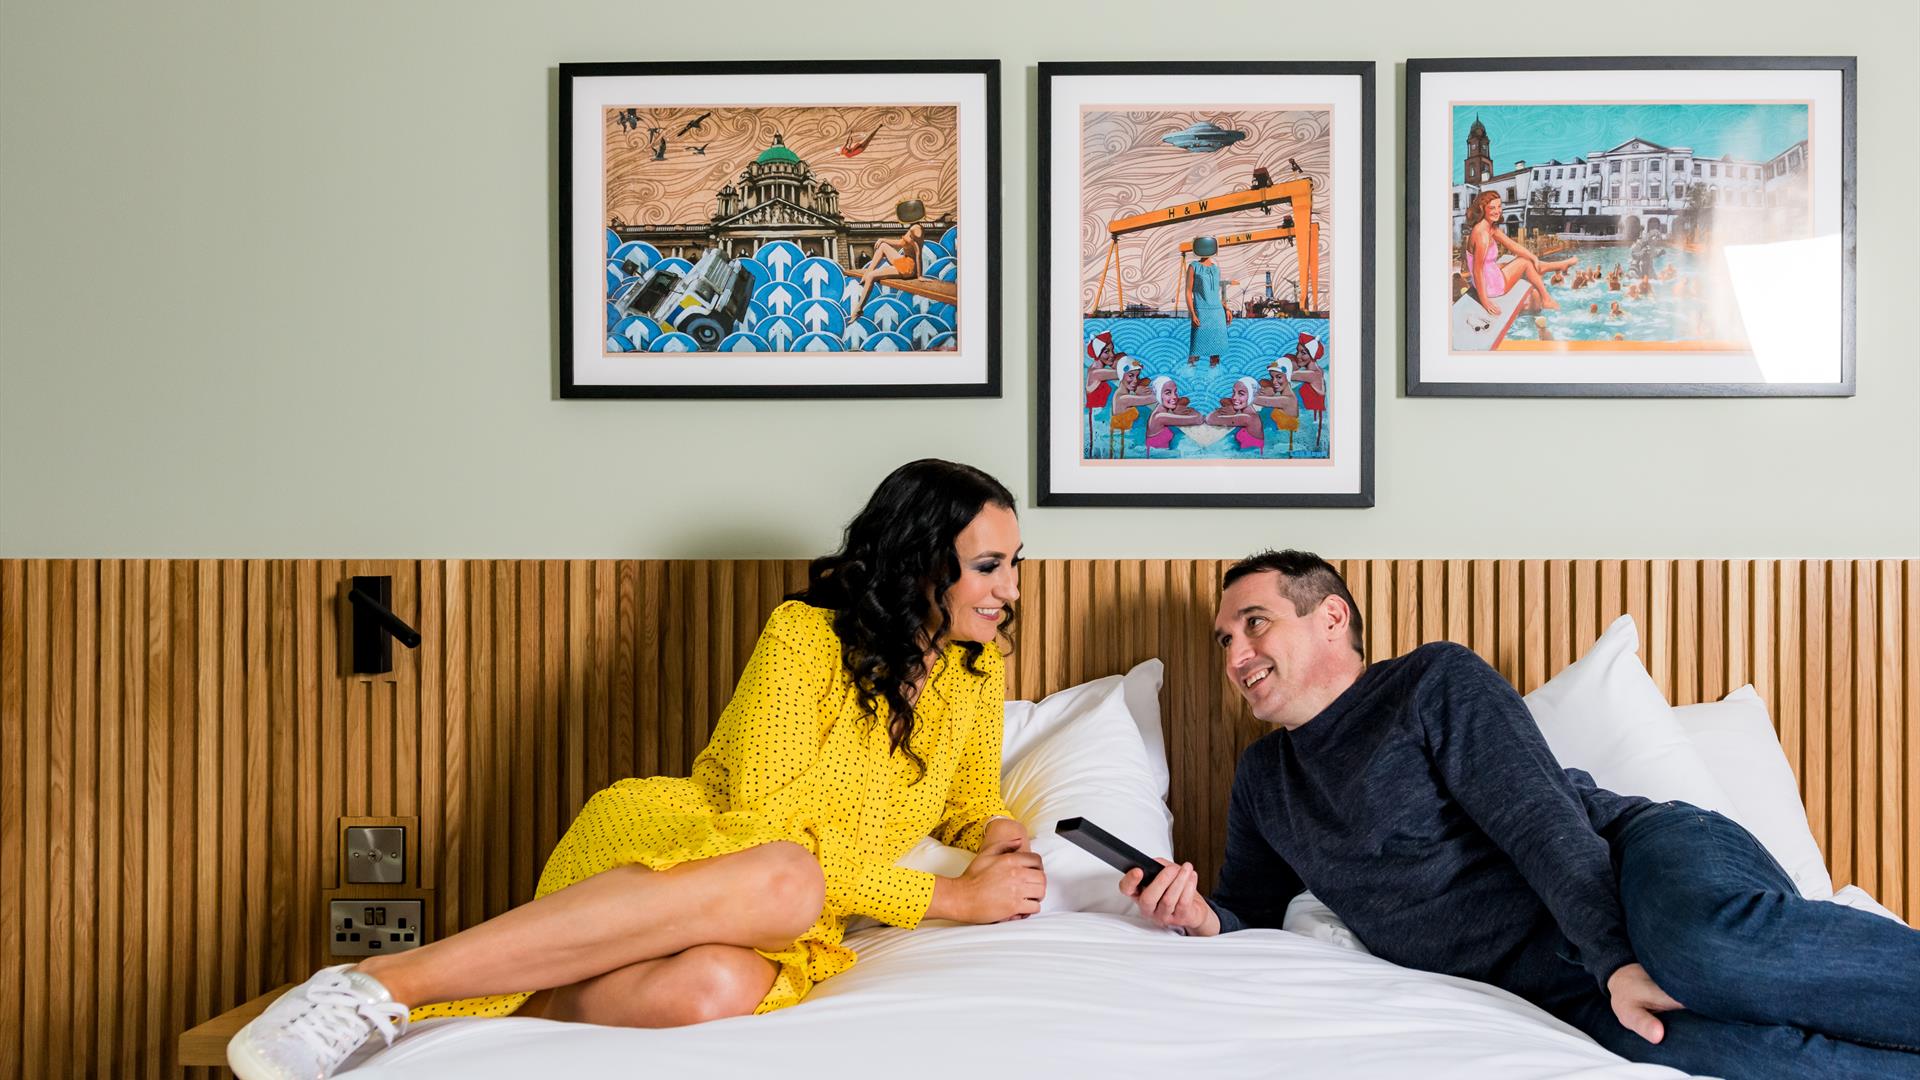 Image shows a man and woman lounging on a double bed with paintings of Northern Ireland on the background wall